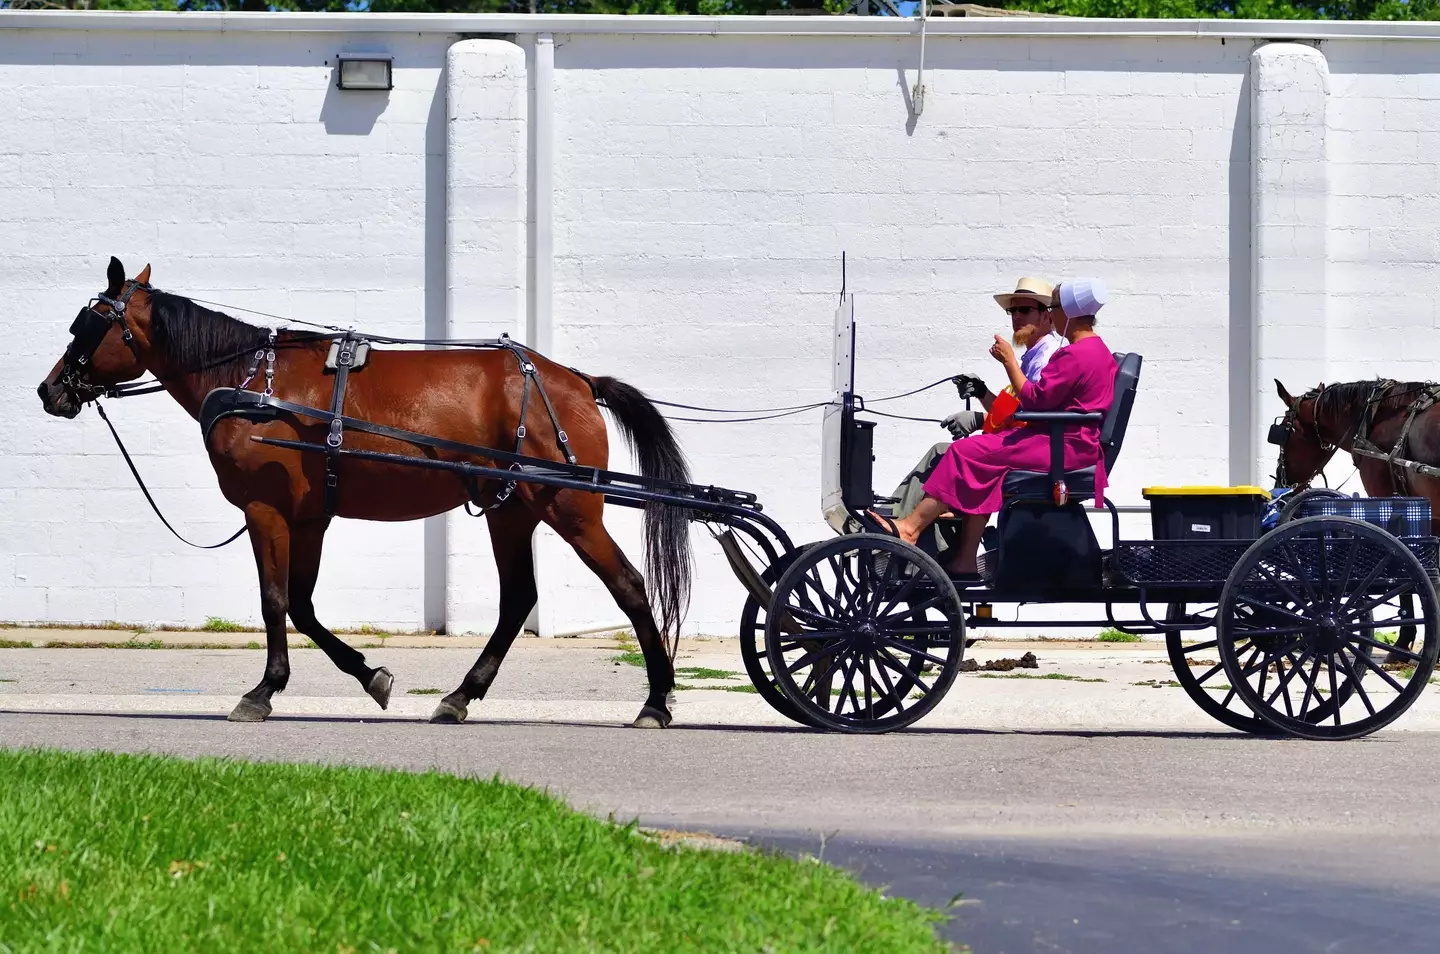 The drunken man and his horse had come from an Amish community.